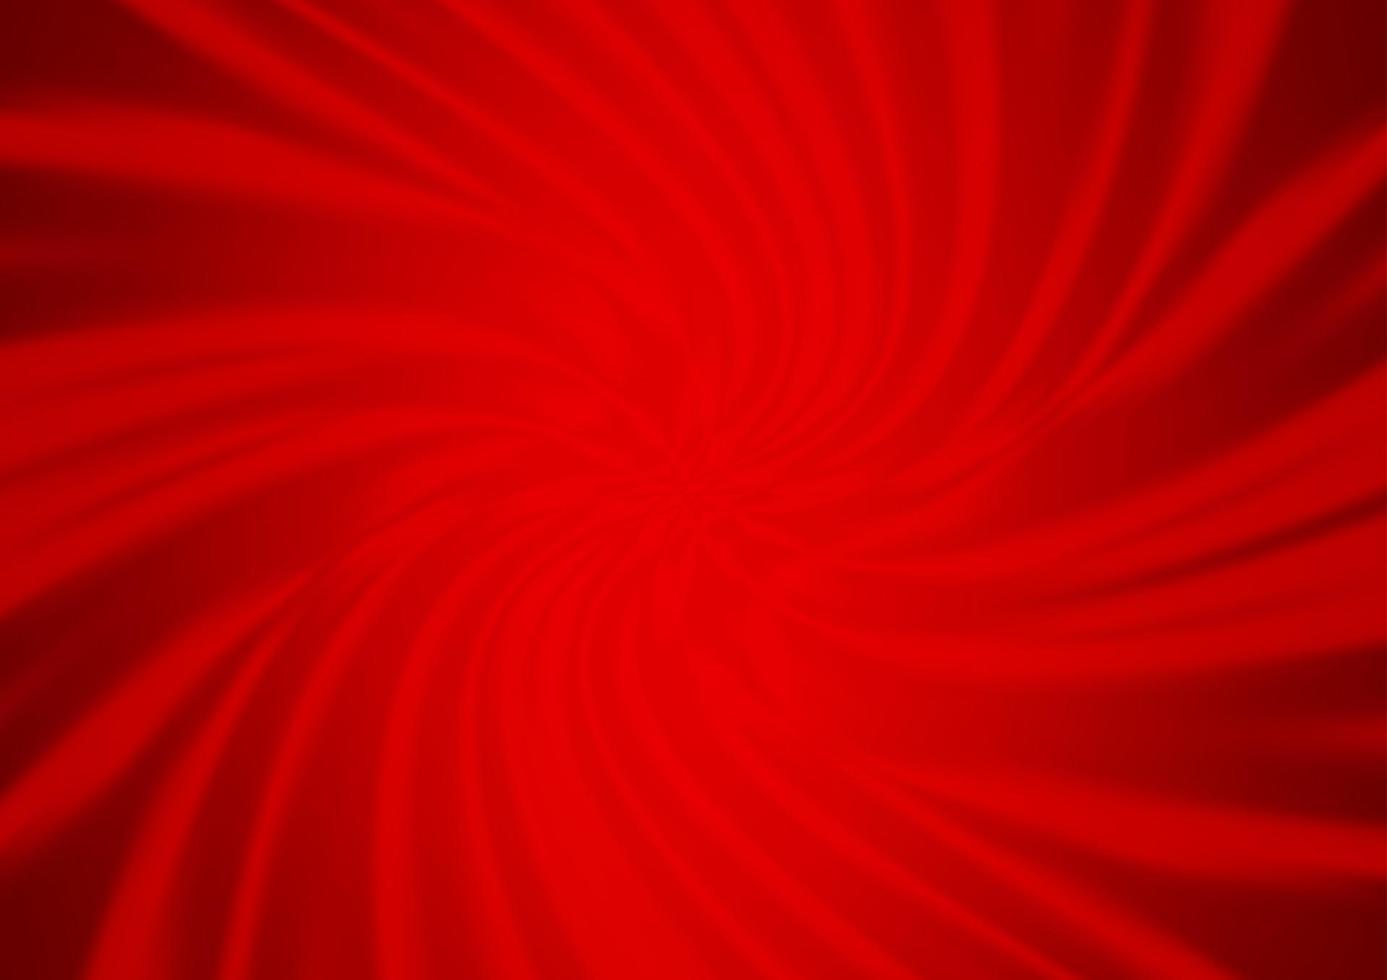 Light Red vector blurred background.